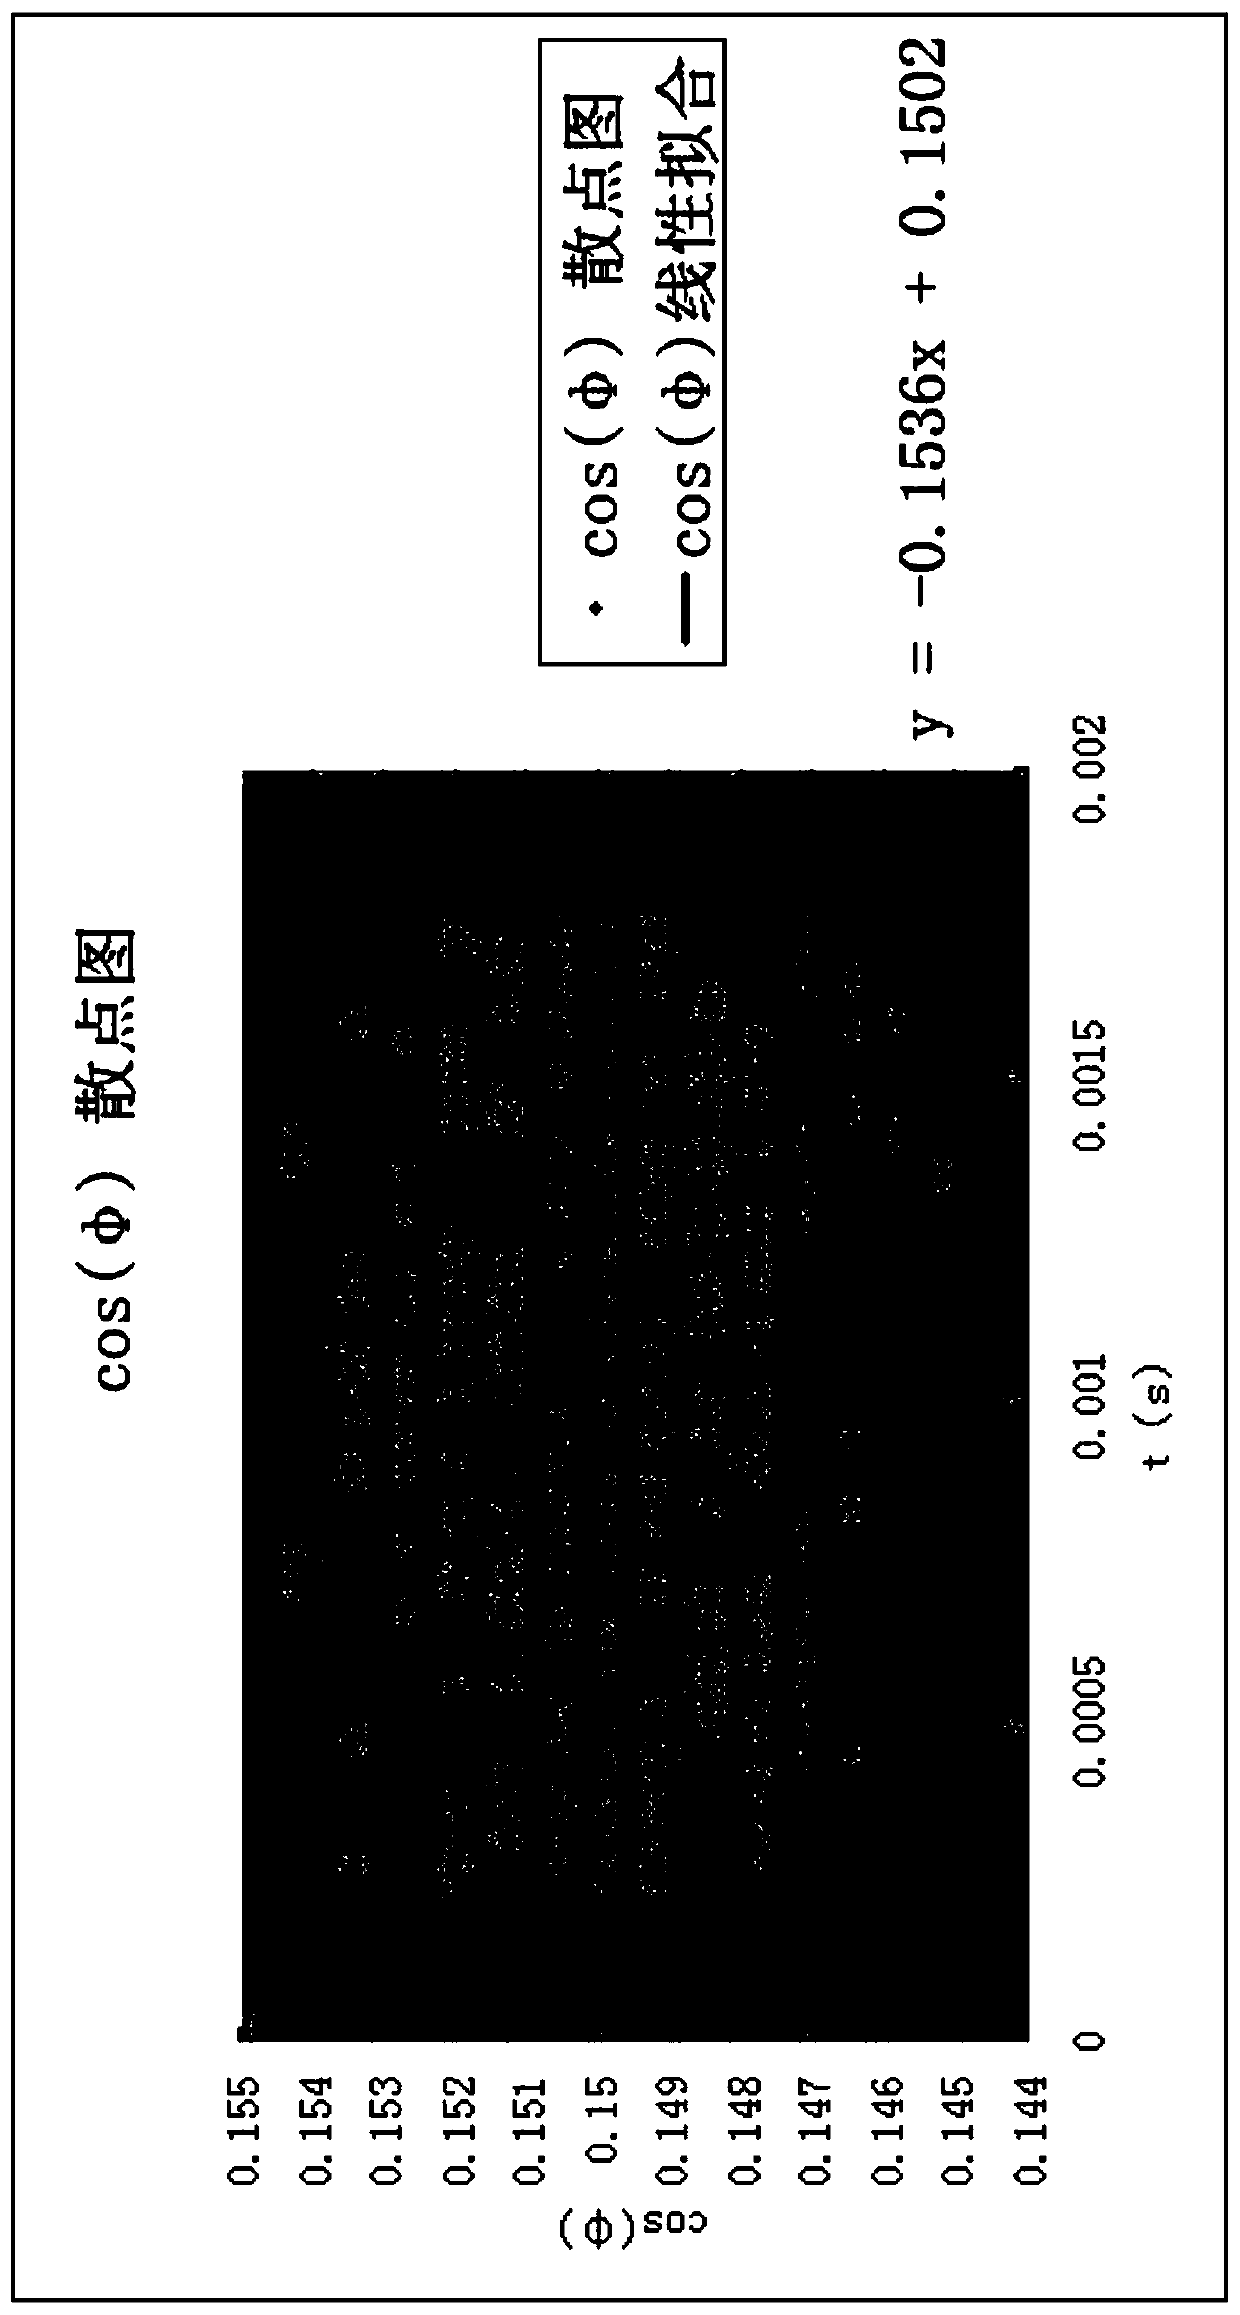 Equal-period fitting measurement method of power factor in short-circuit test of low-voltage apparatus